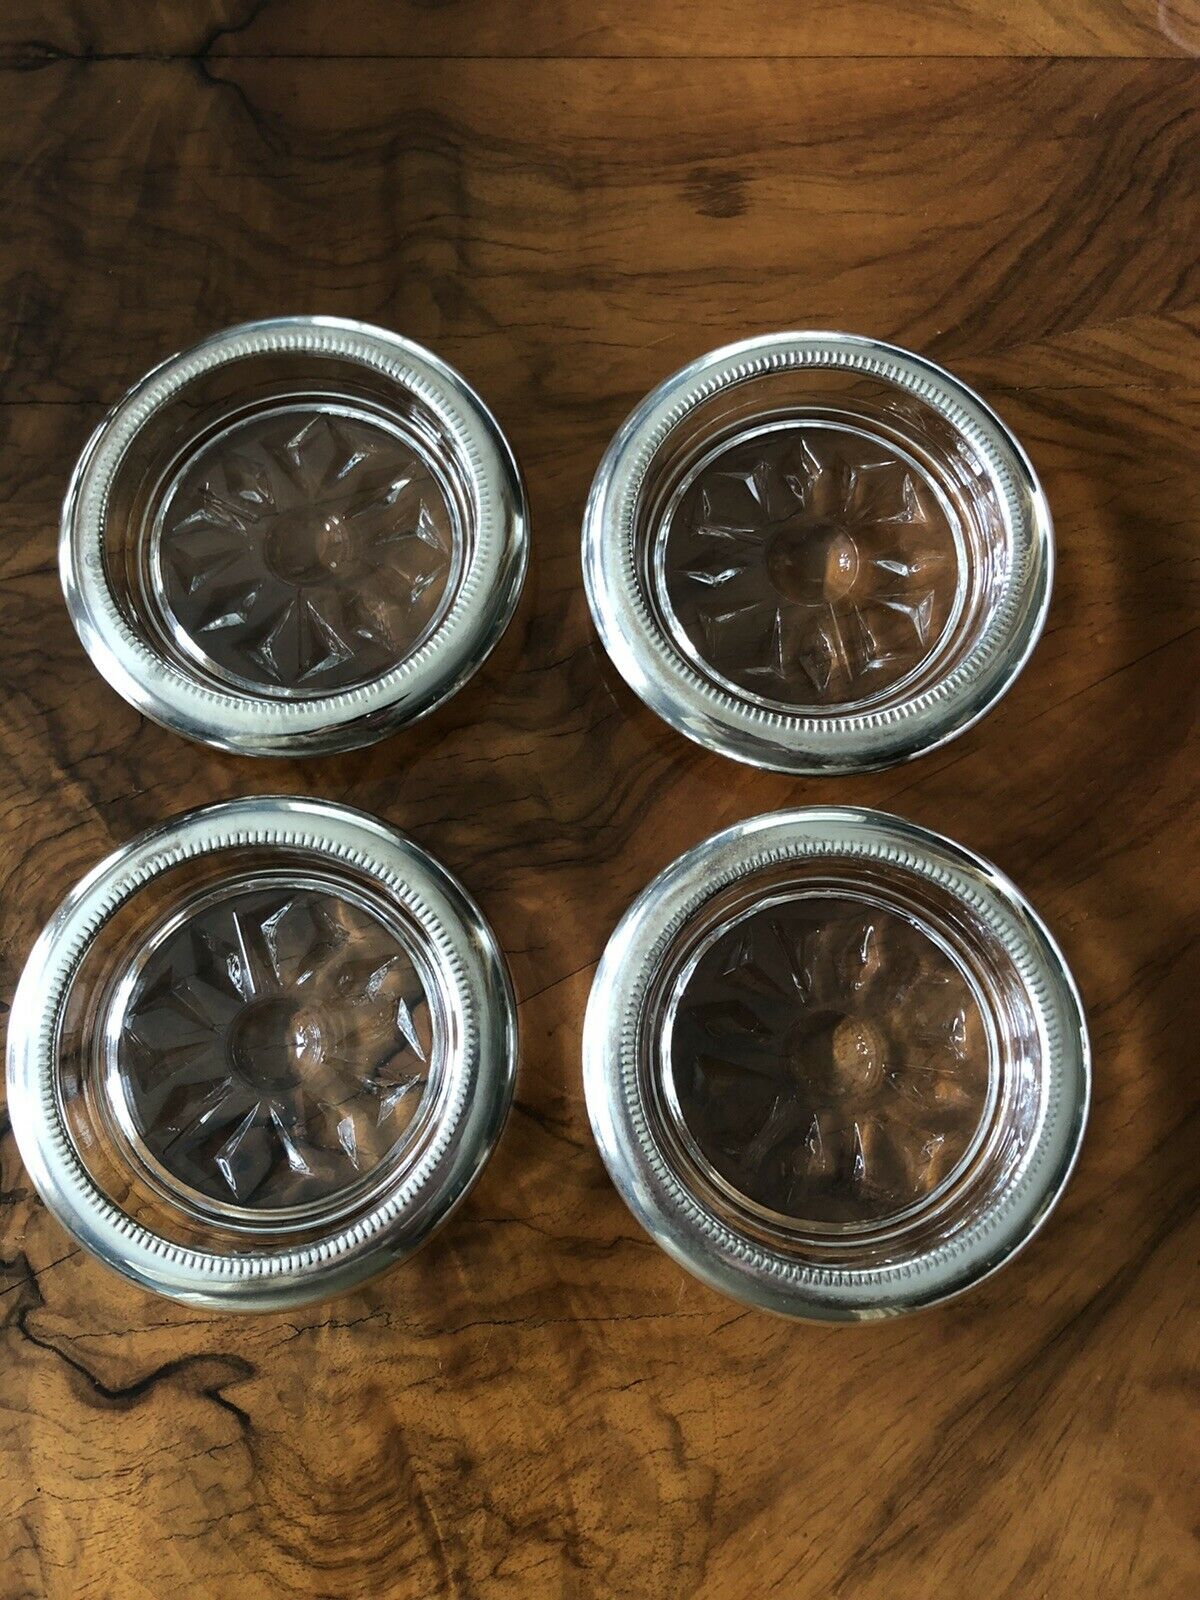 Vintage Italian Silver Plated And Cut Glass Coasters -set Of 4 Made In Italy